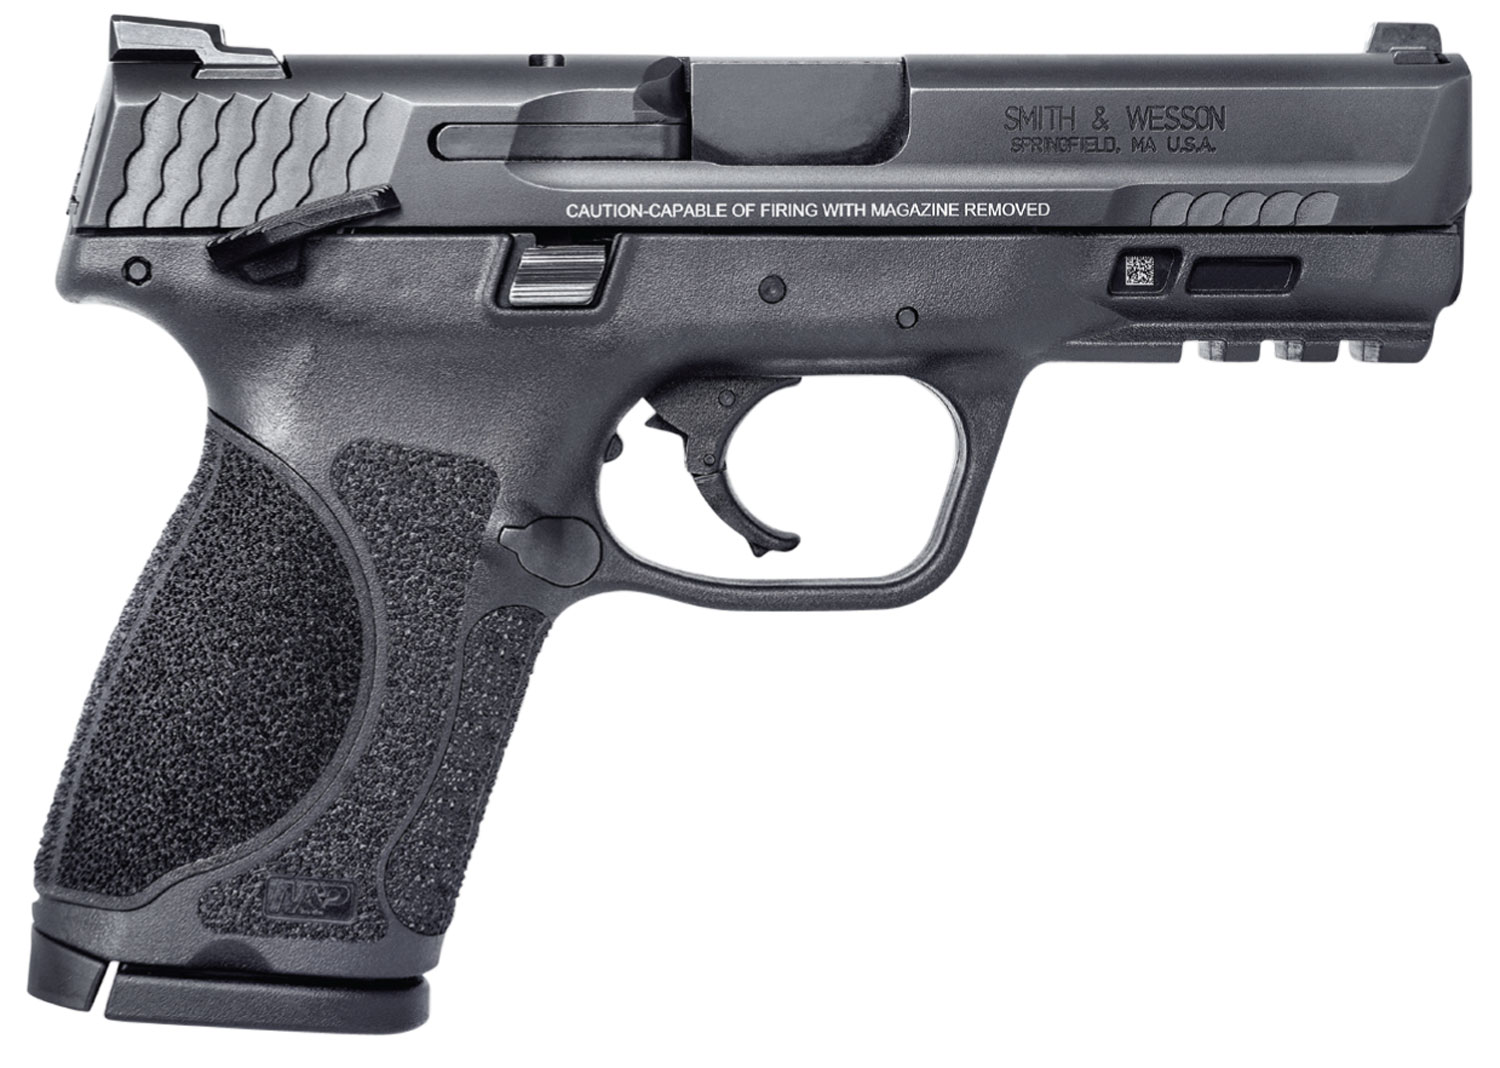 Smith & Wesson 11687 M&P M2.0 Compact 40 S&W 4